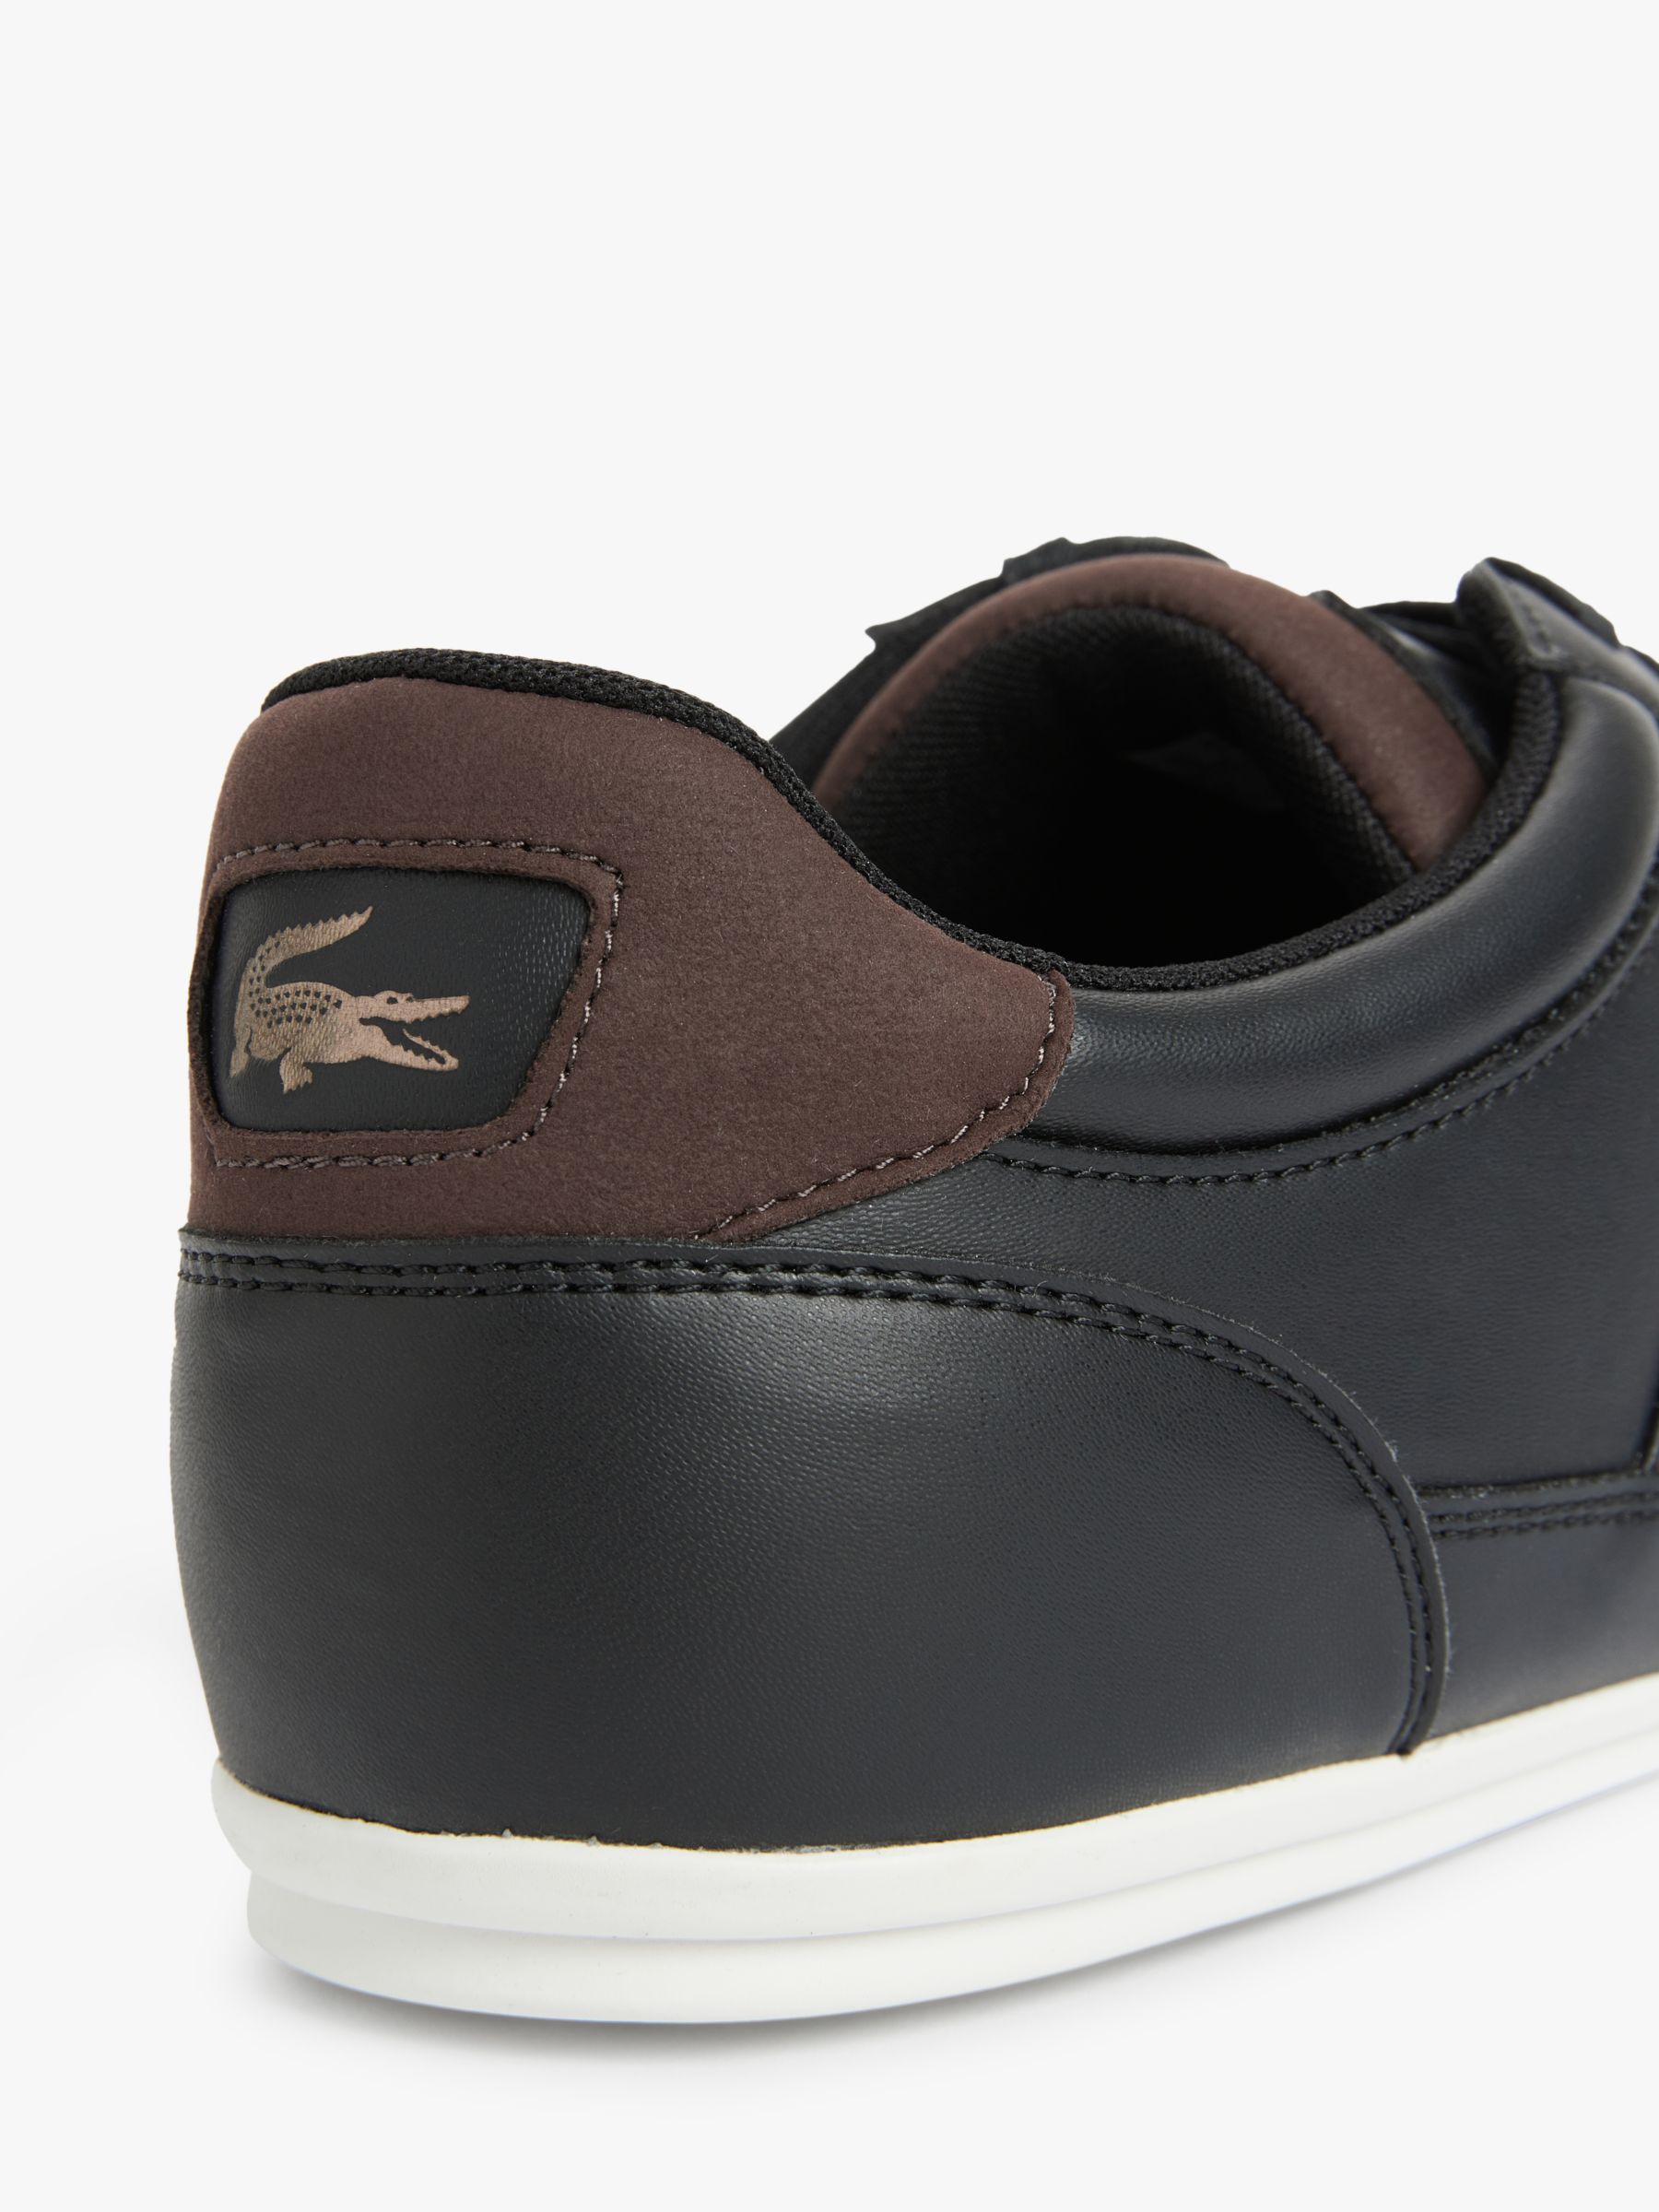 lacoste chaymon trainers brown